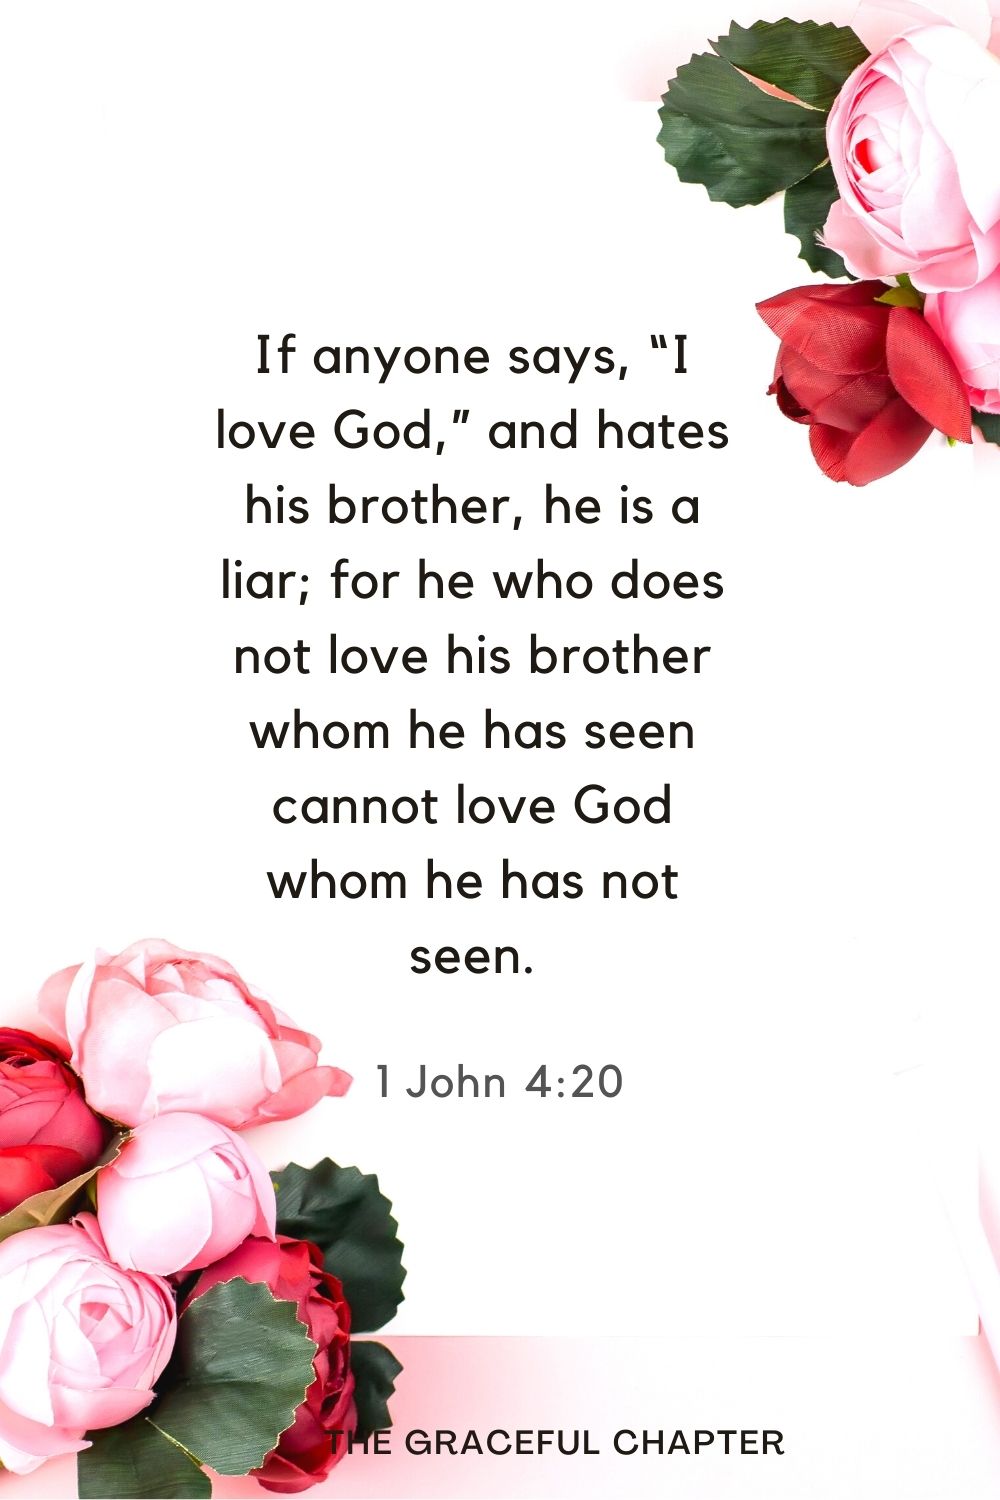 If anyone says, “I love God,” and hates his brother, he is a liar; for he who does not love his brother whom he has seen cannot love God whom he has not seen. 1 John 4:20